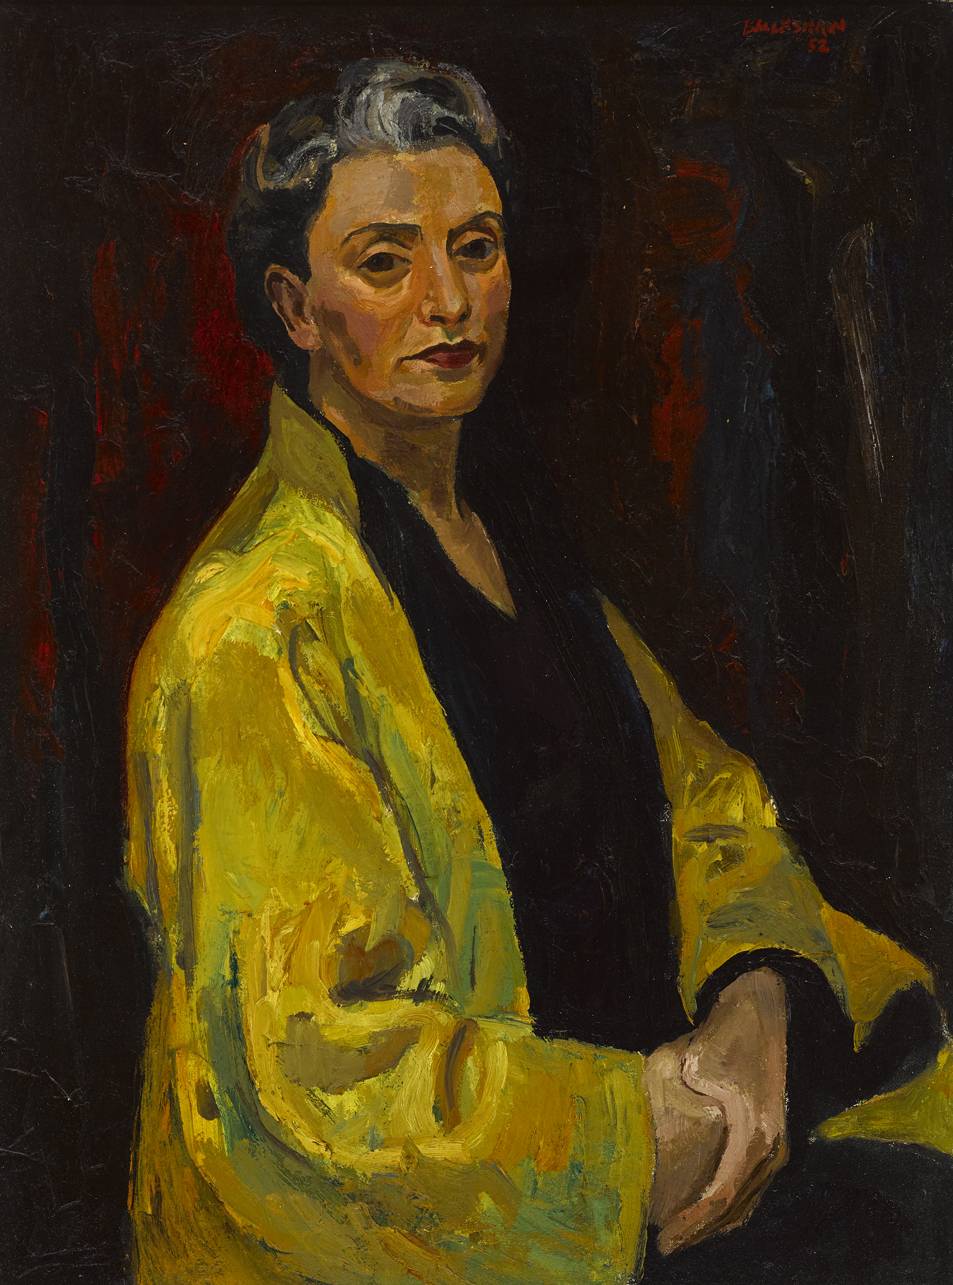 IRENE CALVERT MP, 1952 by Basil Blackshaw sold for 3,800 at Whyte's Auctions